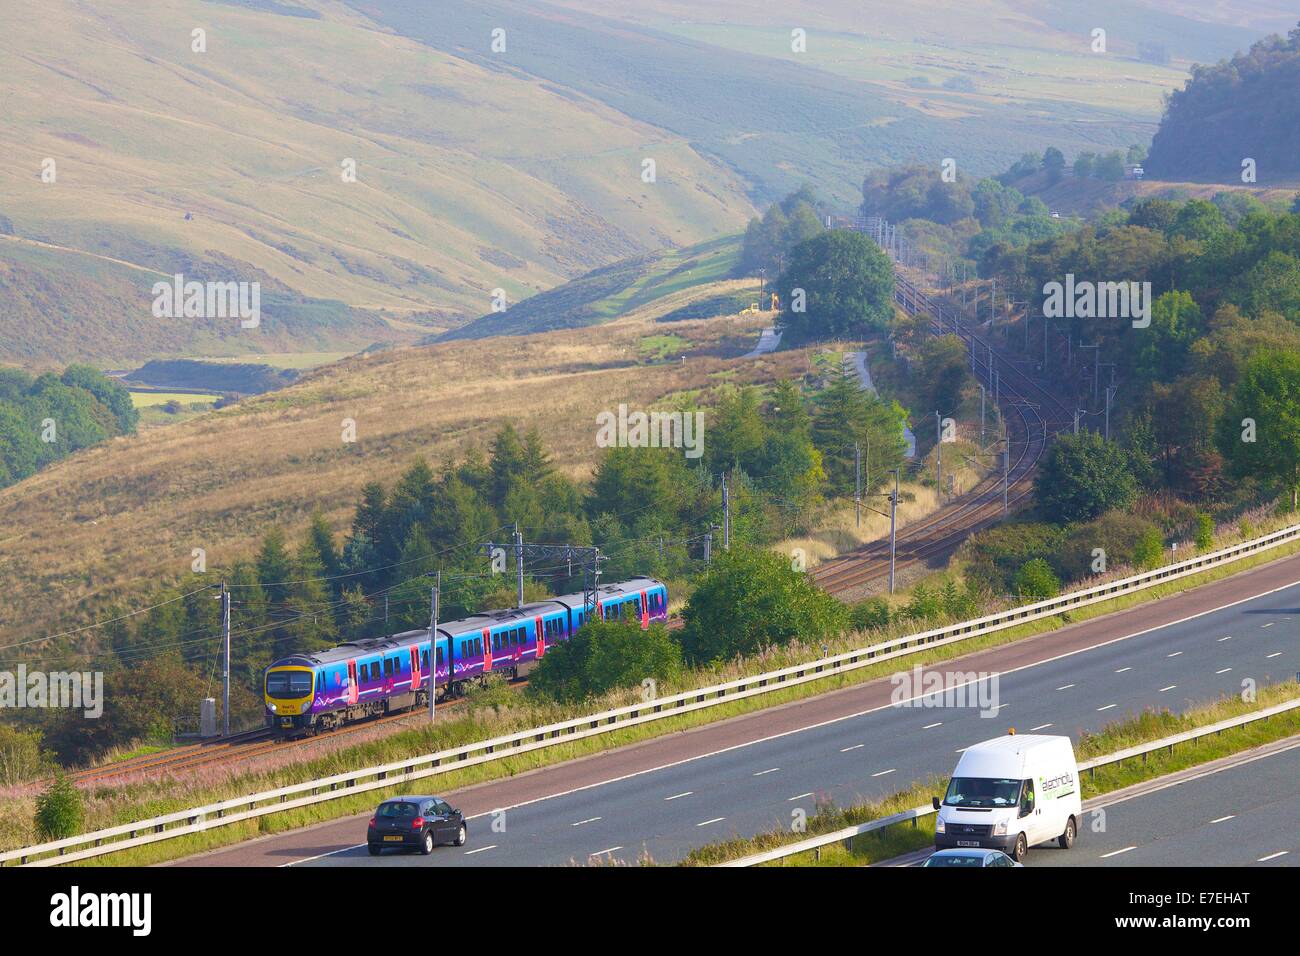 First Group Trans Pennine Express, Class 185 train passing the M6 motorway in the River Lune Valley. Howgills, Cumbria, UK. Stock Photo